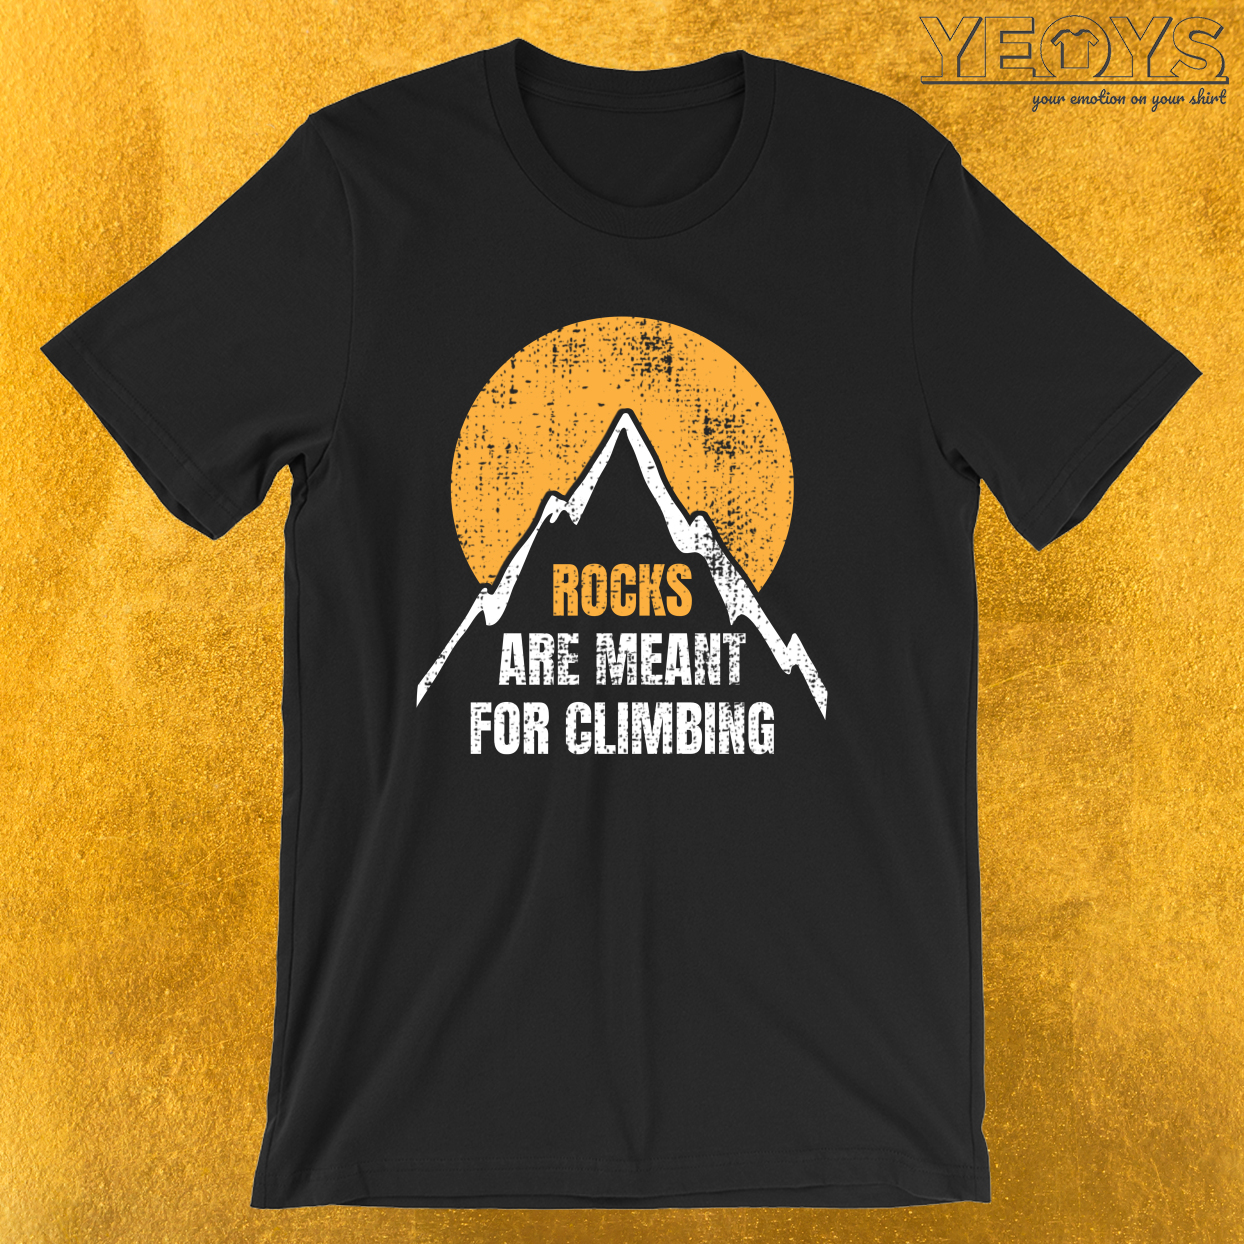 Rocks Are Meant For Climbing – Rock Climbing Tee